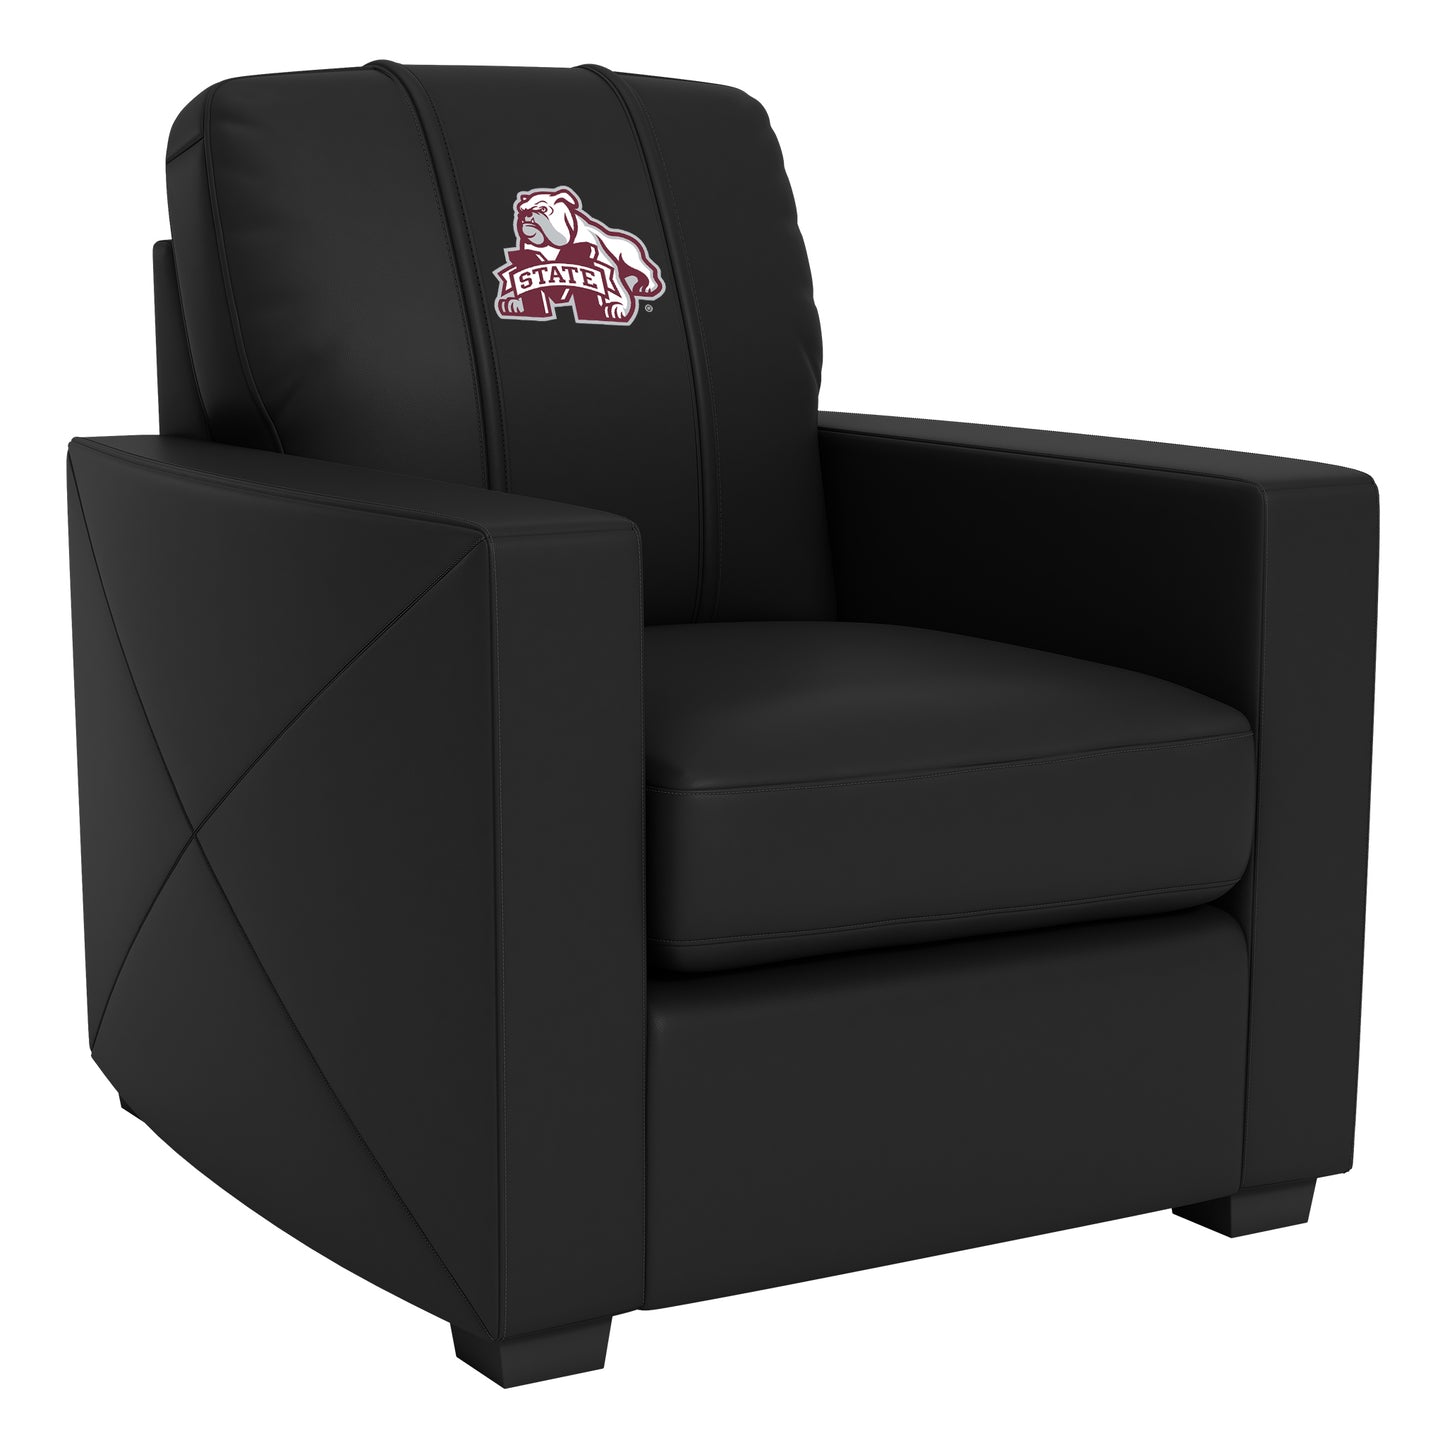 Silver Club Chair with Mississippi State Secondary